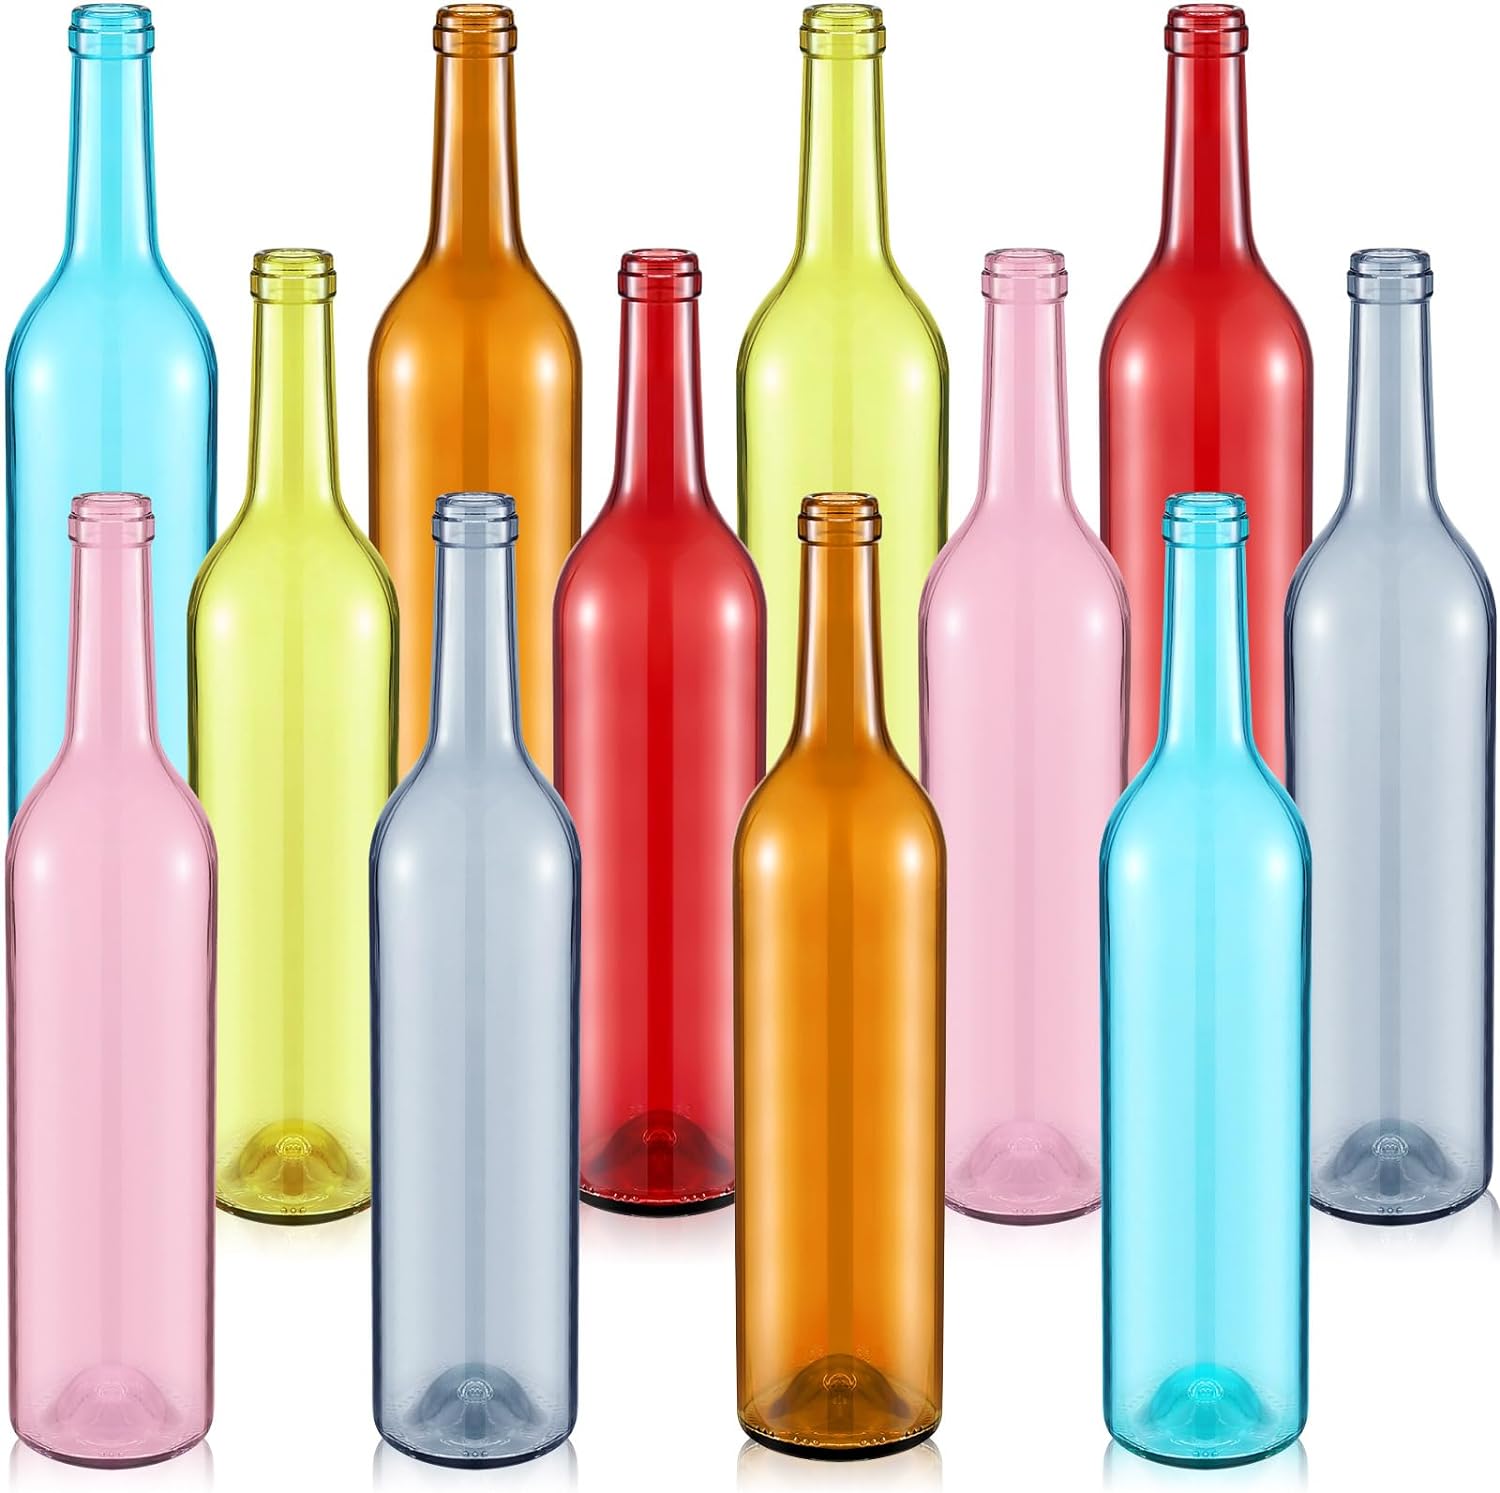 BULK PARADISE Assorted Blue Glass Bottles with Corks, 6 Pack, 2.5in X 9in,  16oz